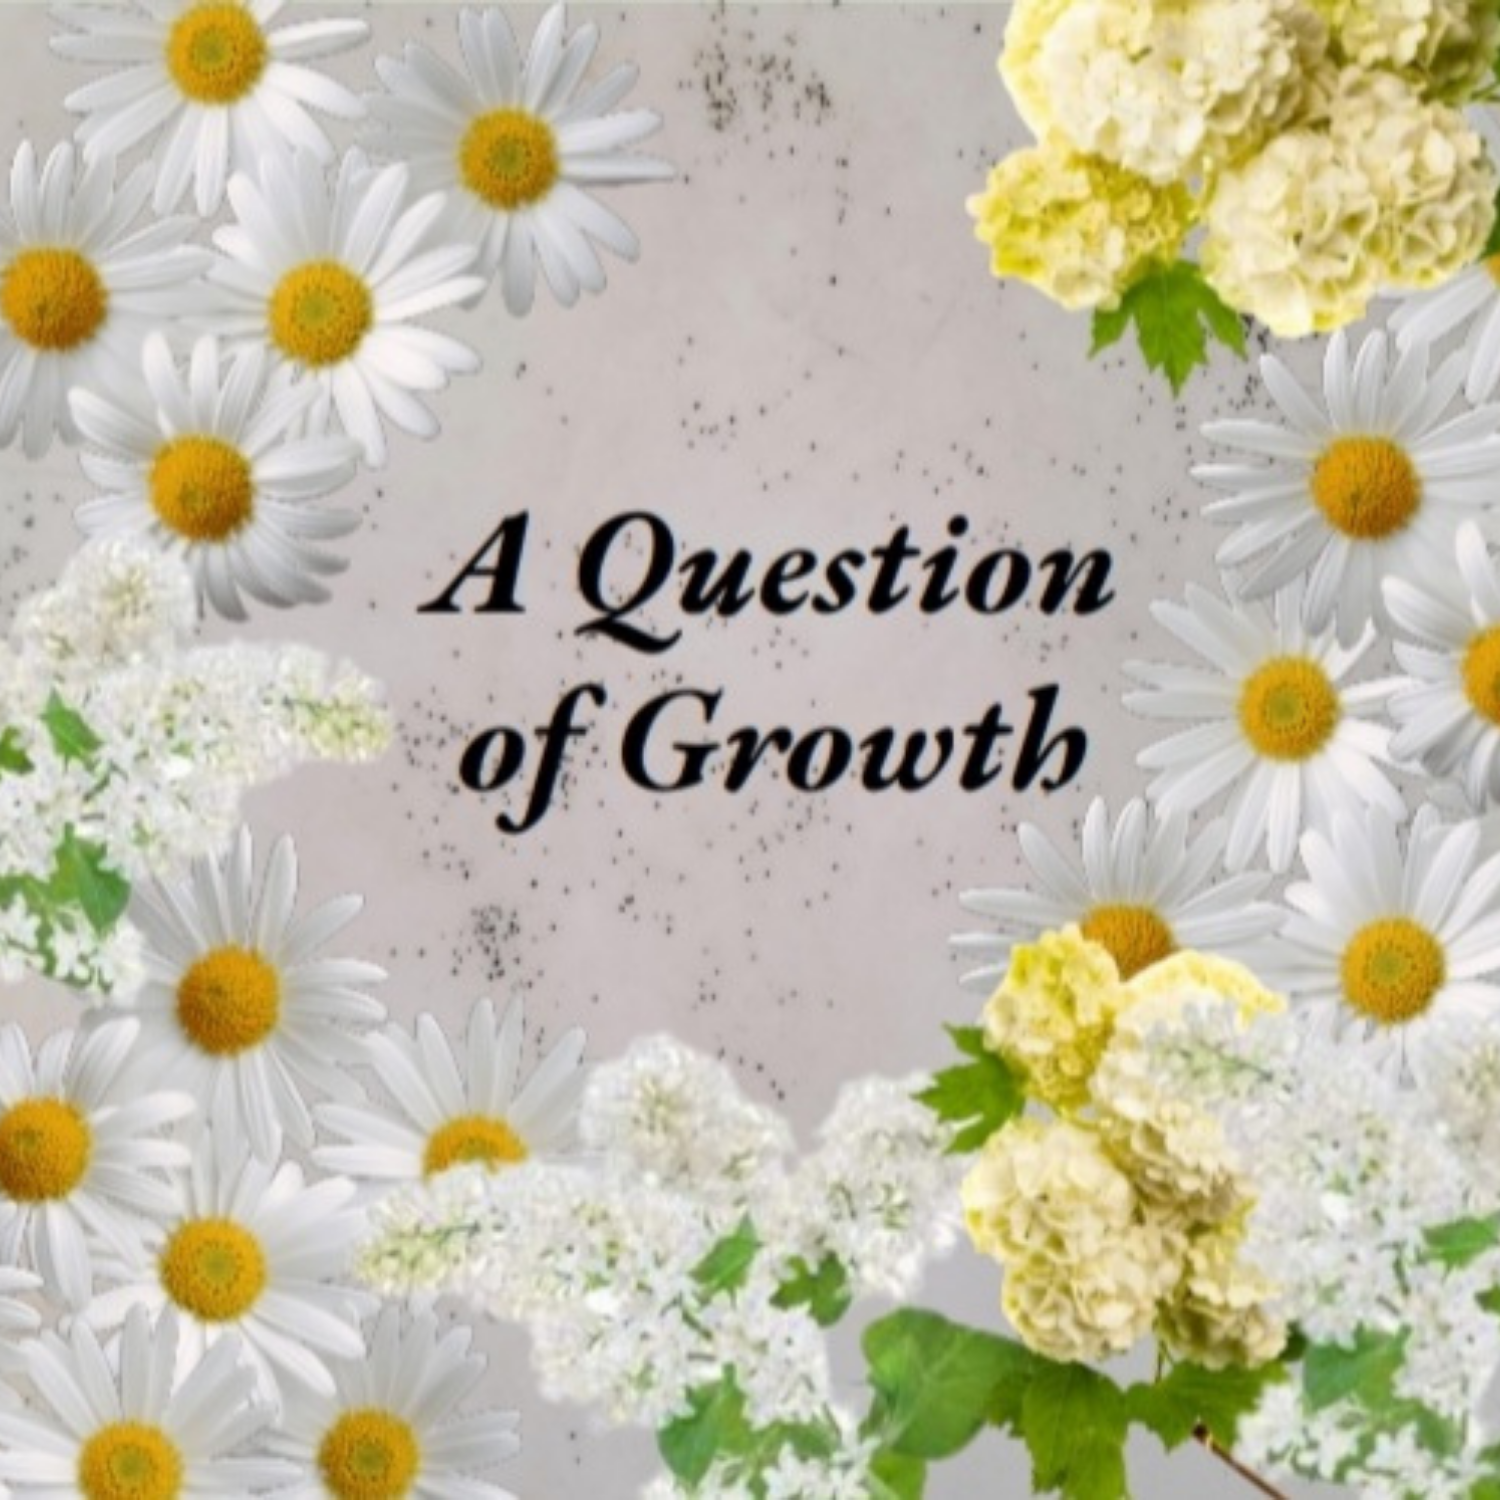 A Question of Growth